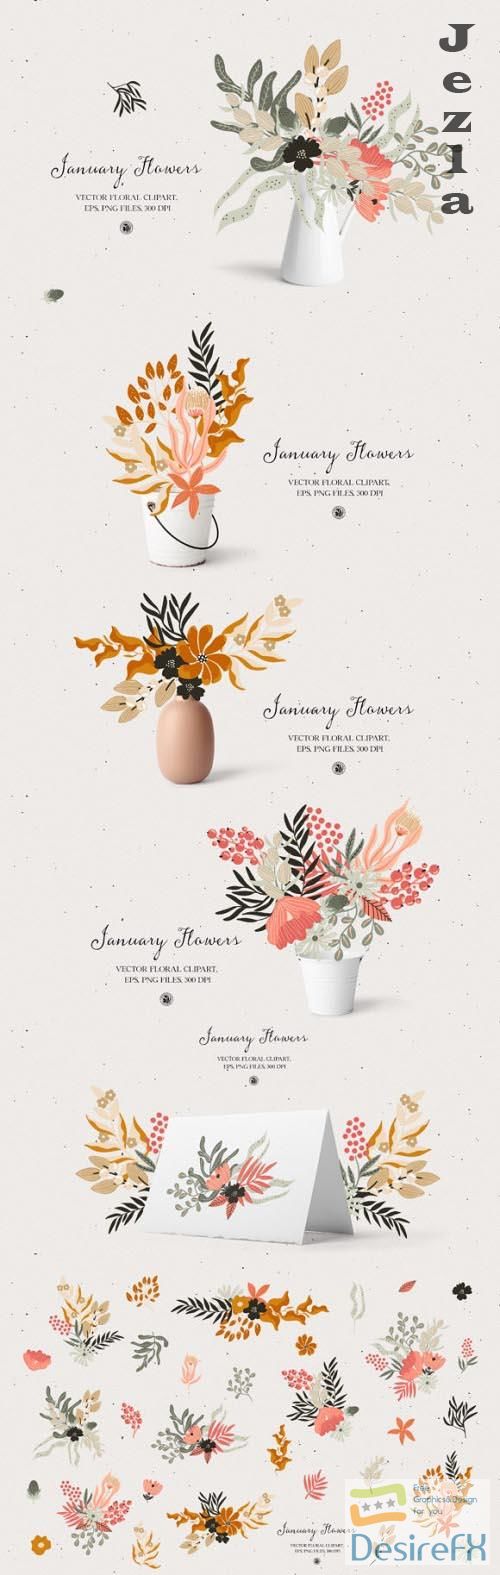 January Flowers - Floral Vector Set